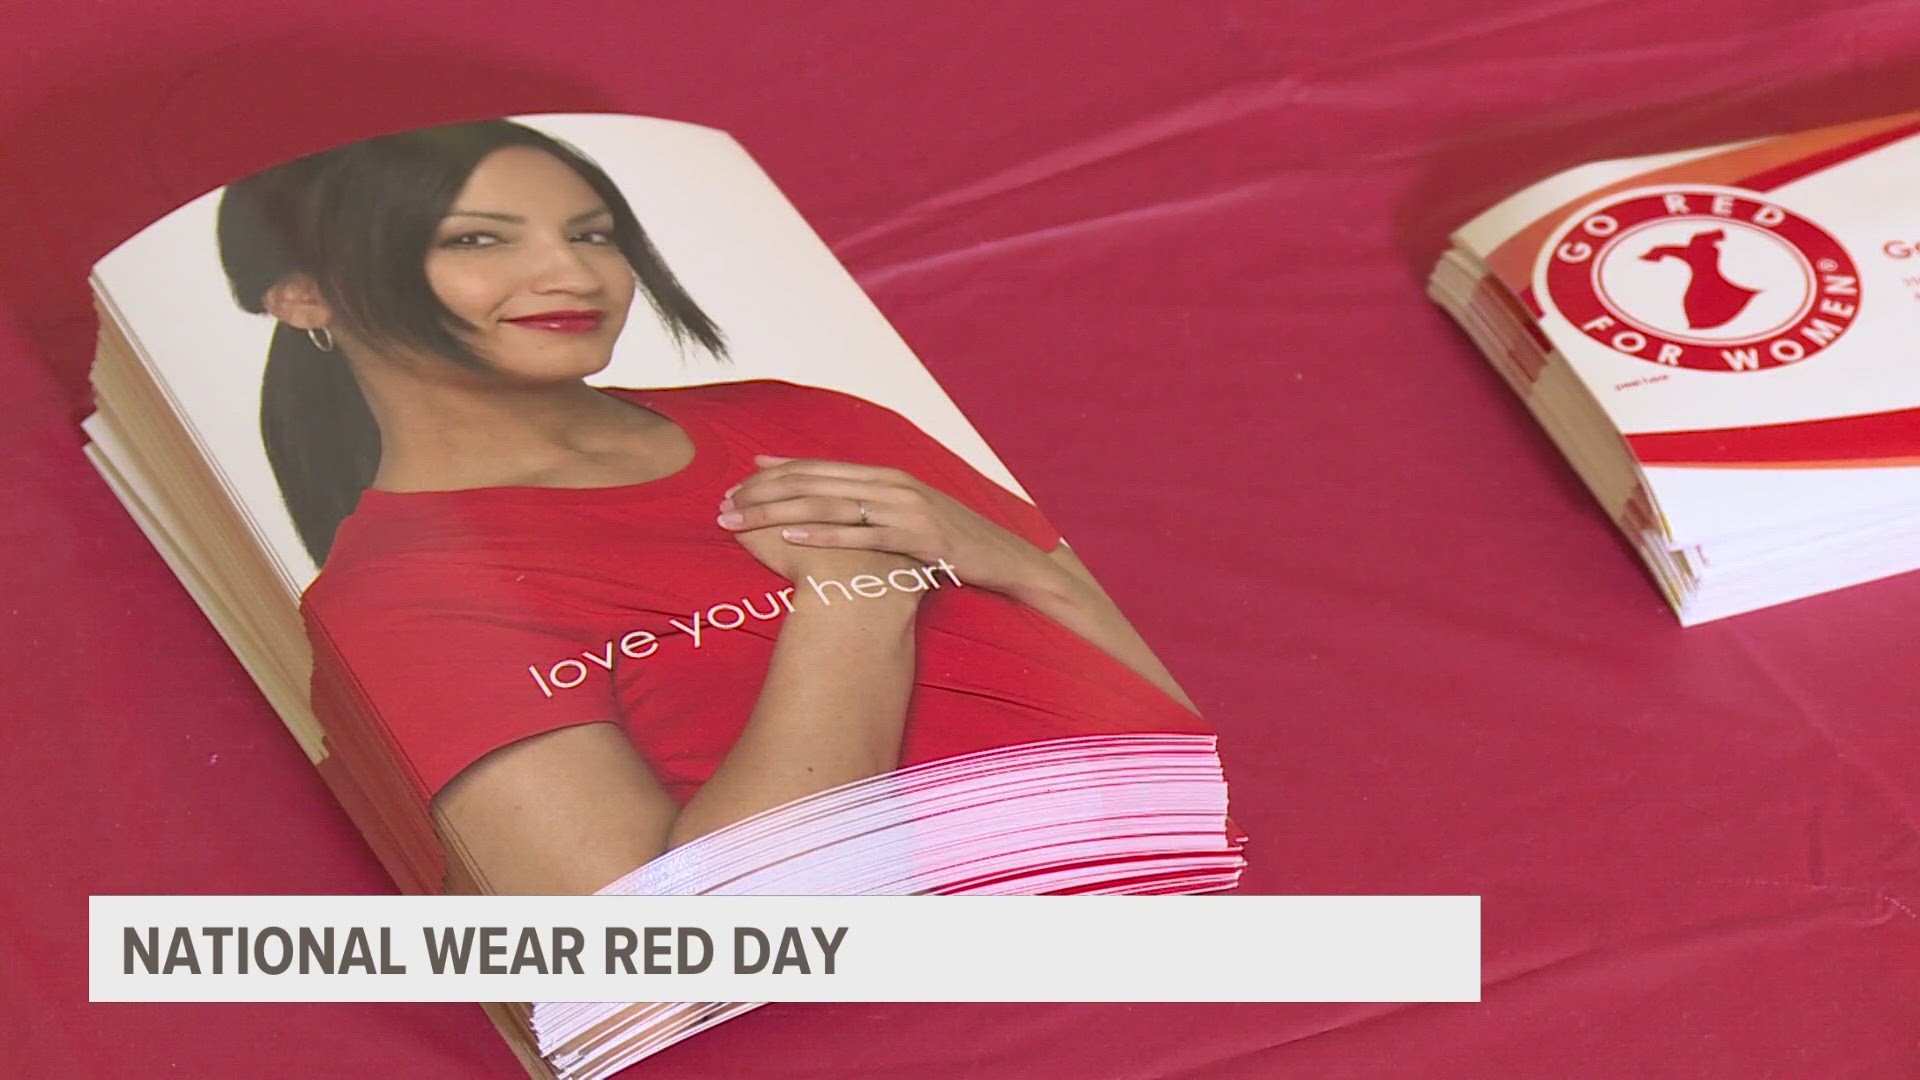 American Heart Association on X: For most our 100-year history, heart  disease was perceived to be a man's disease. Go Red for Women was launched  to raise awareness that heart disease is